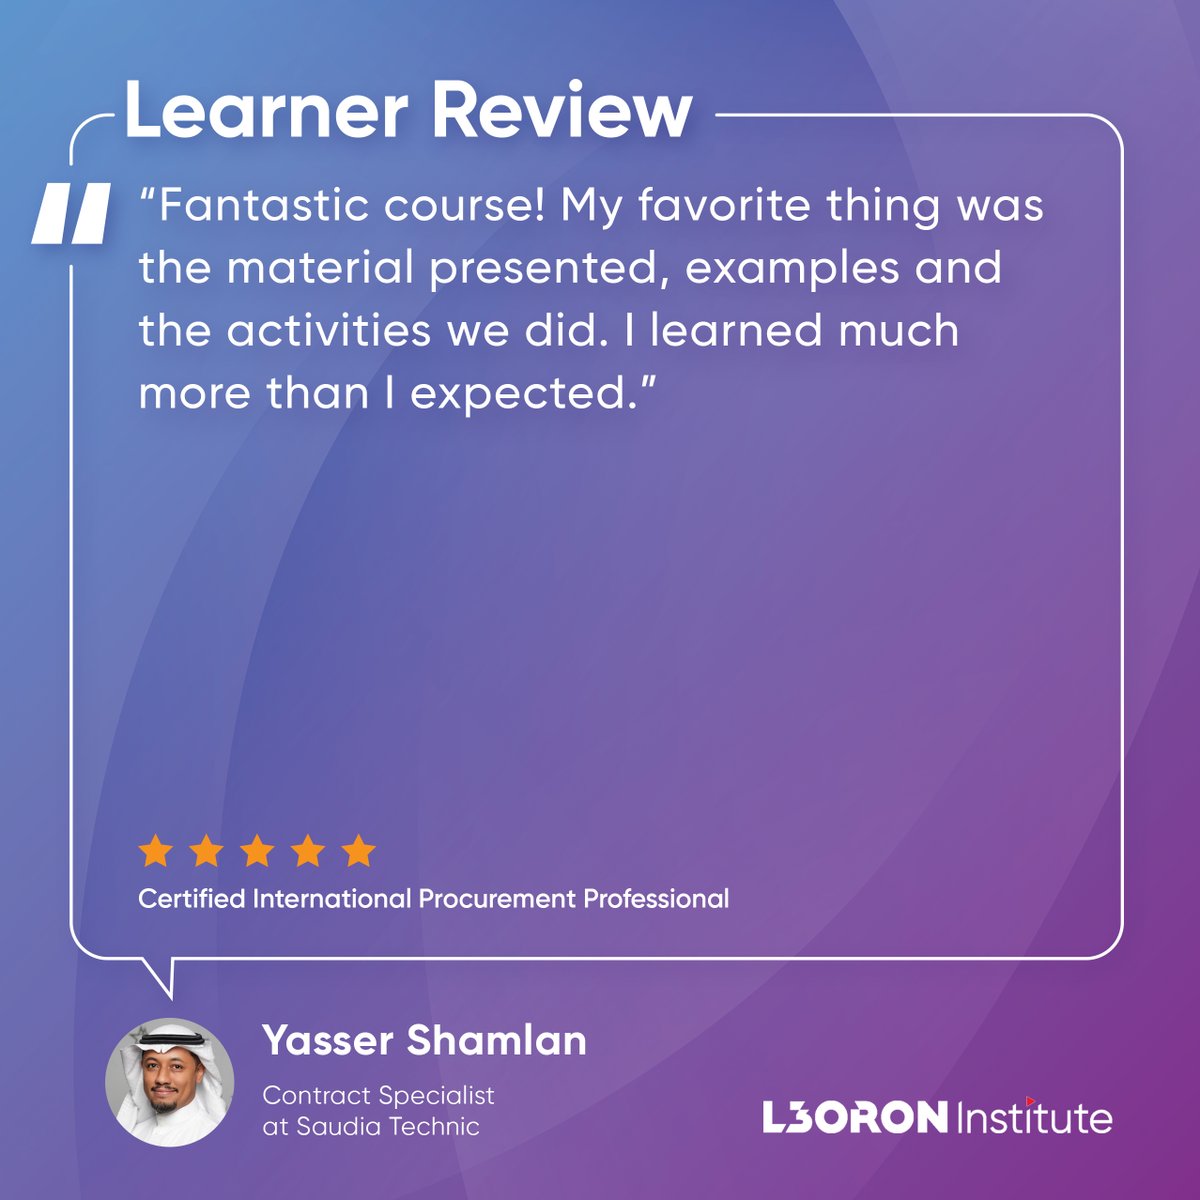 We are thrilled to receive such #positivefeedback from Yasser! ✨

Join us for the next session of the Certified International #ProcurementProfessional #trainingprogram in June and enhance your procurement skills as well!

Register here: t.ly/SgtmH

#LearnerReview